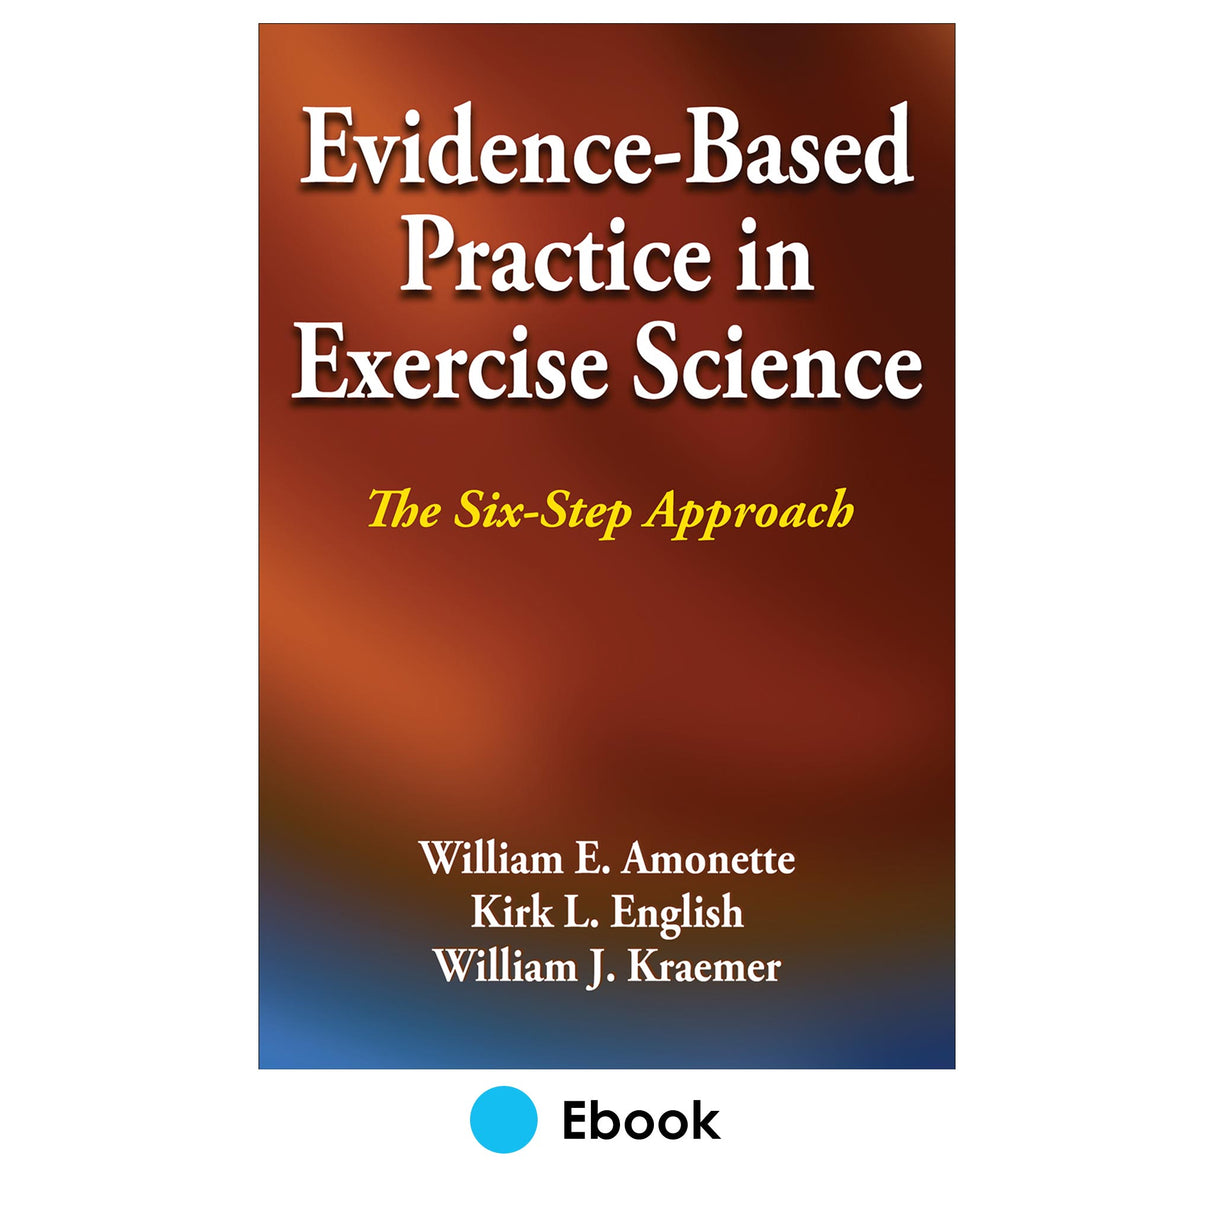 Evidence-Based Practice in Exercise Science PDF